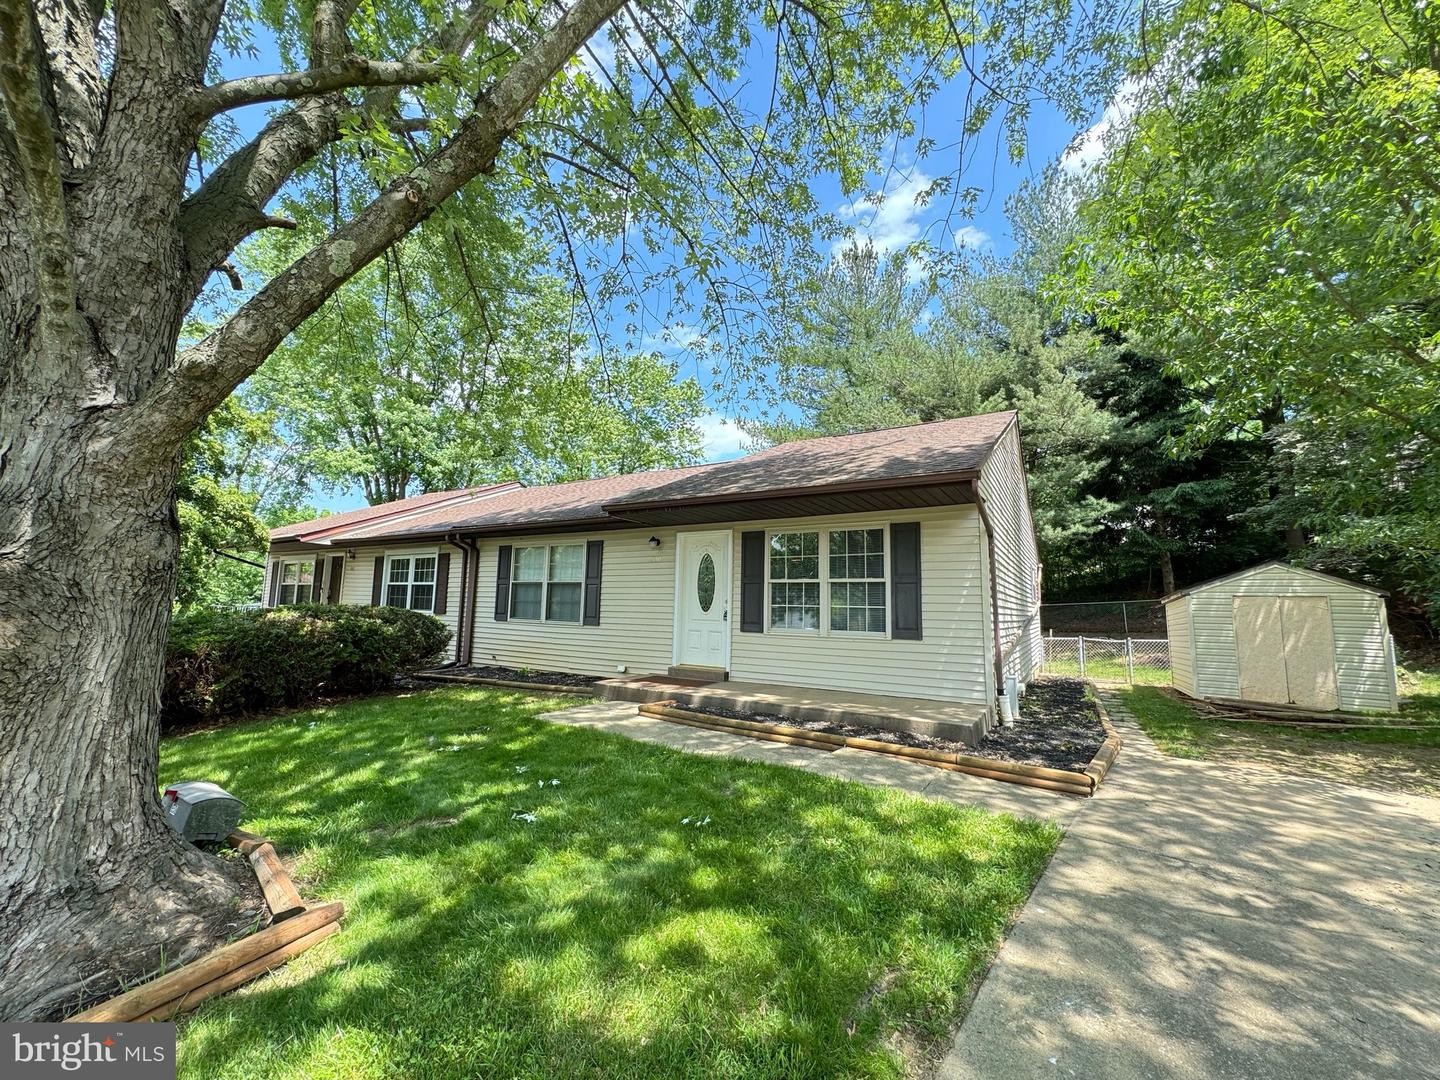 2. 950 Ruby Dr